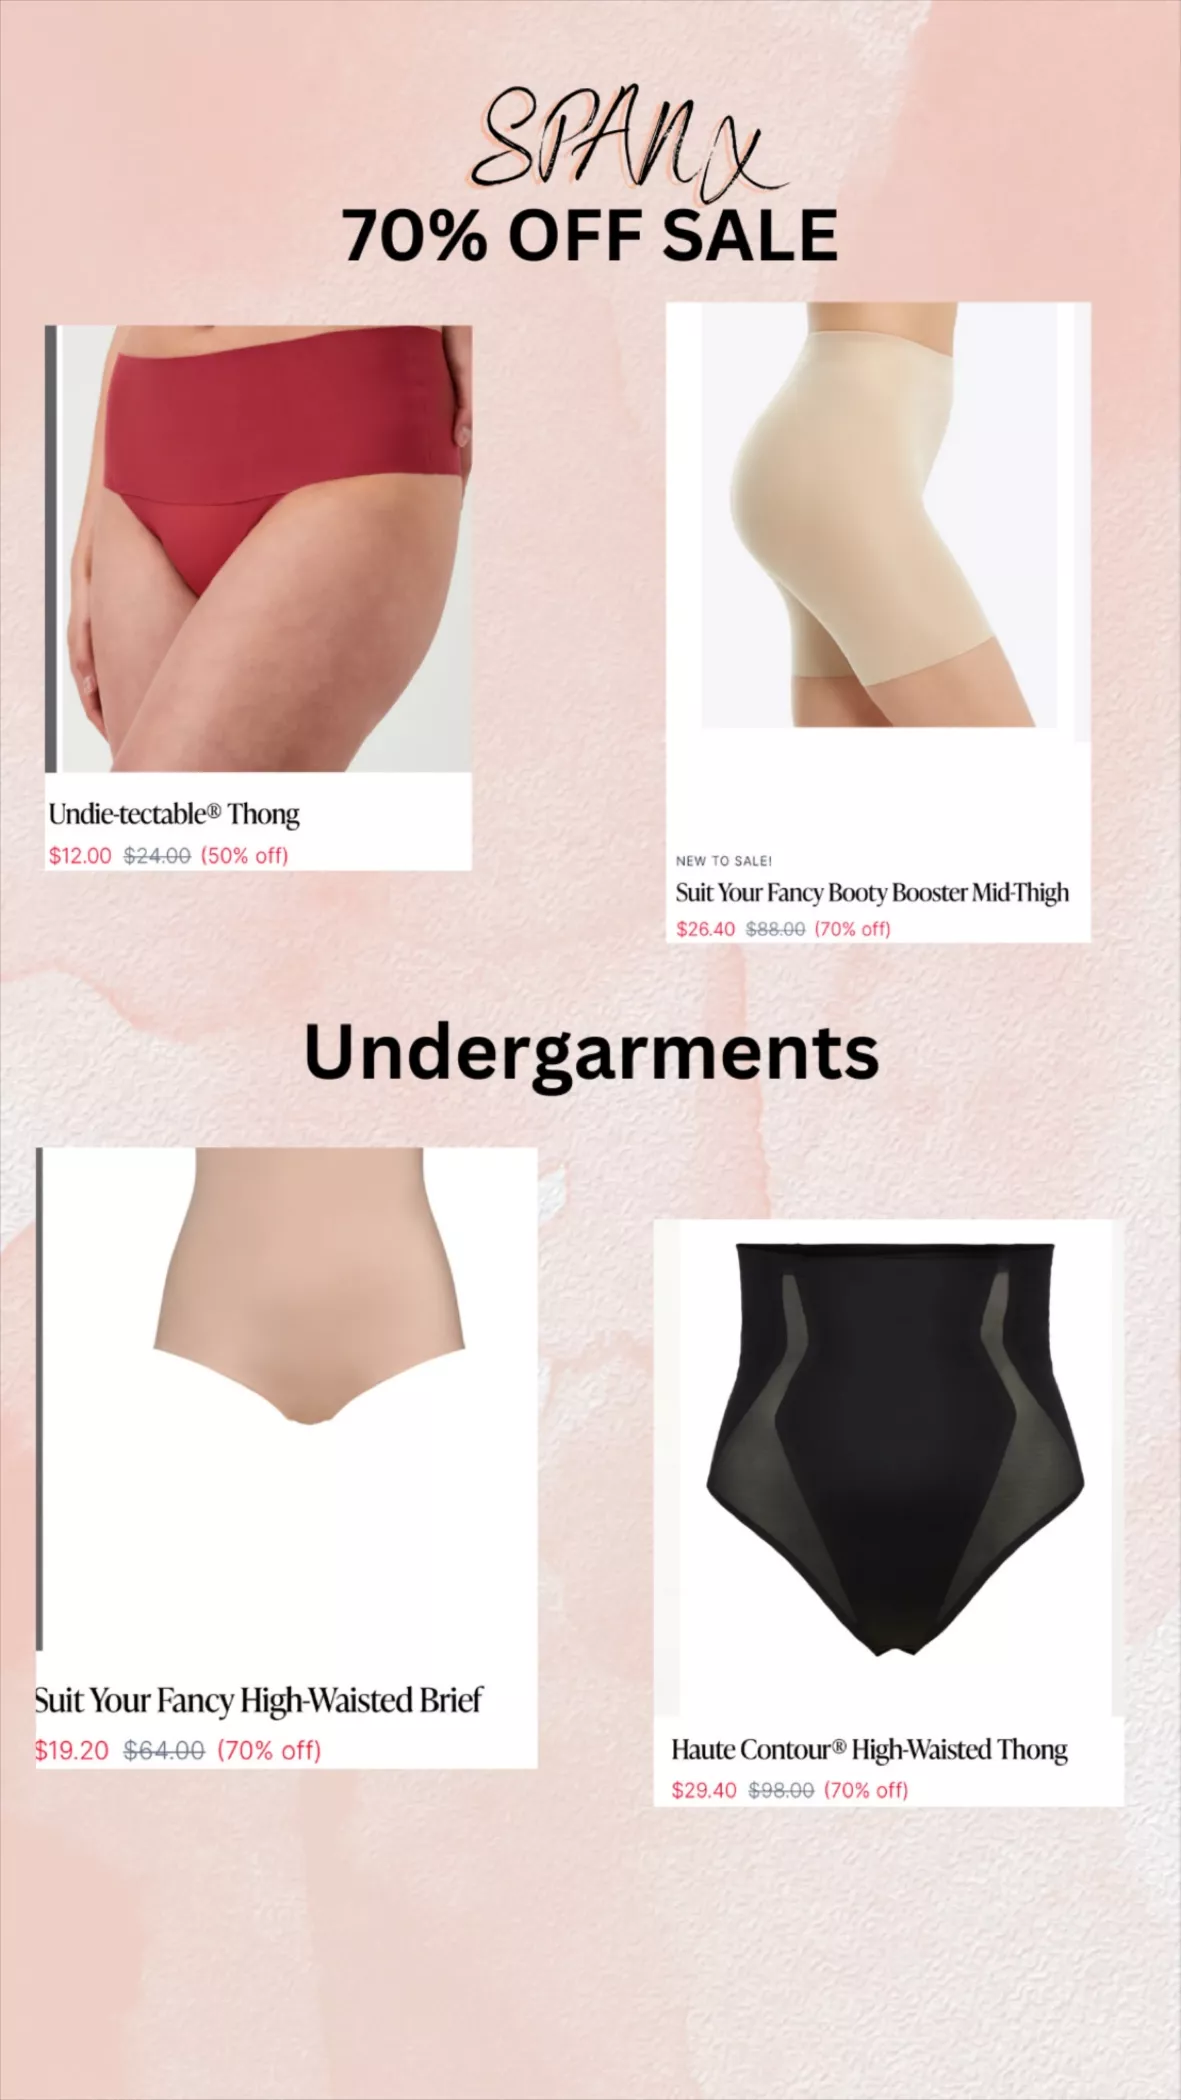 Spanx Suit Your Fancy High-Waisted Brief